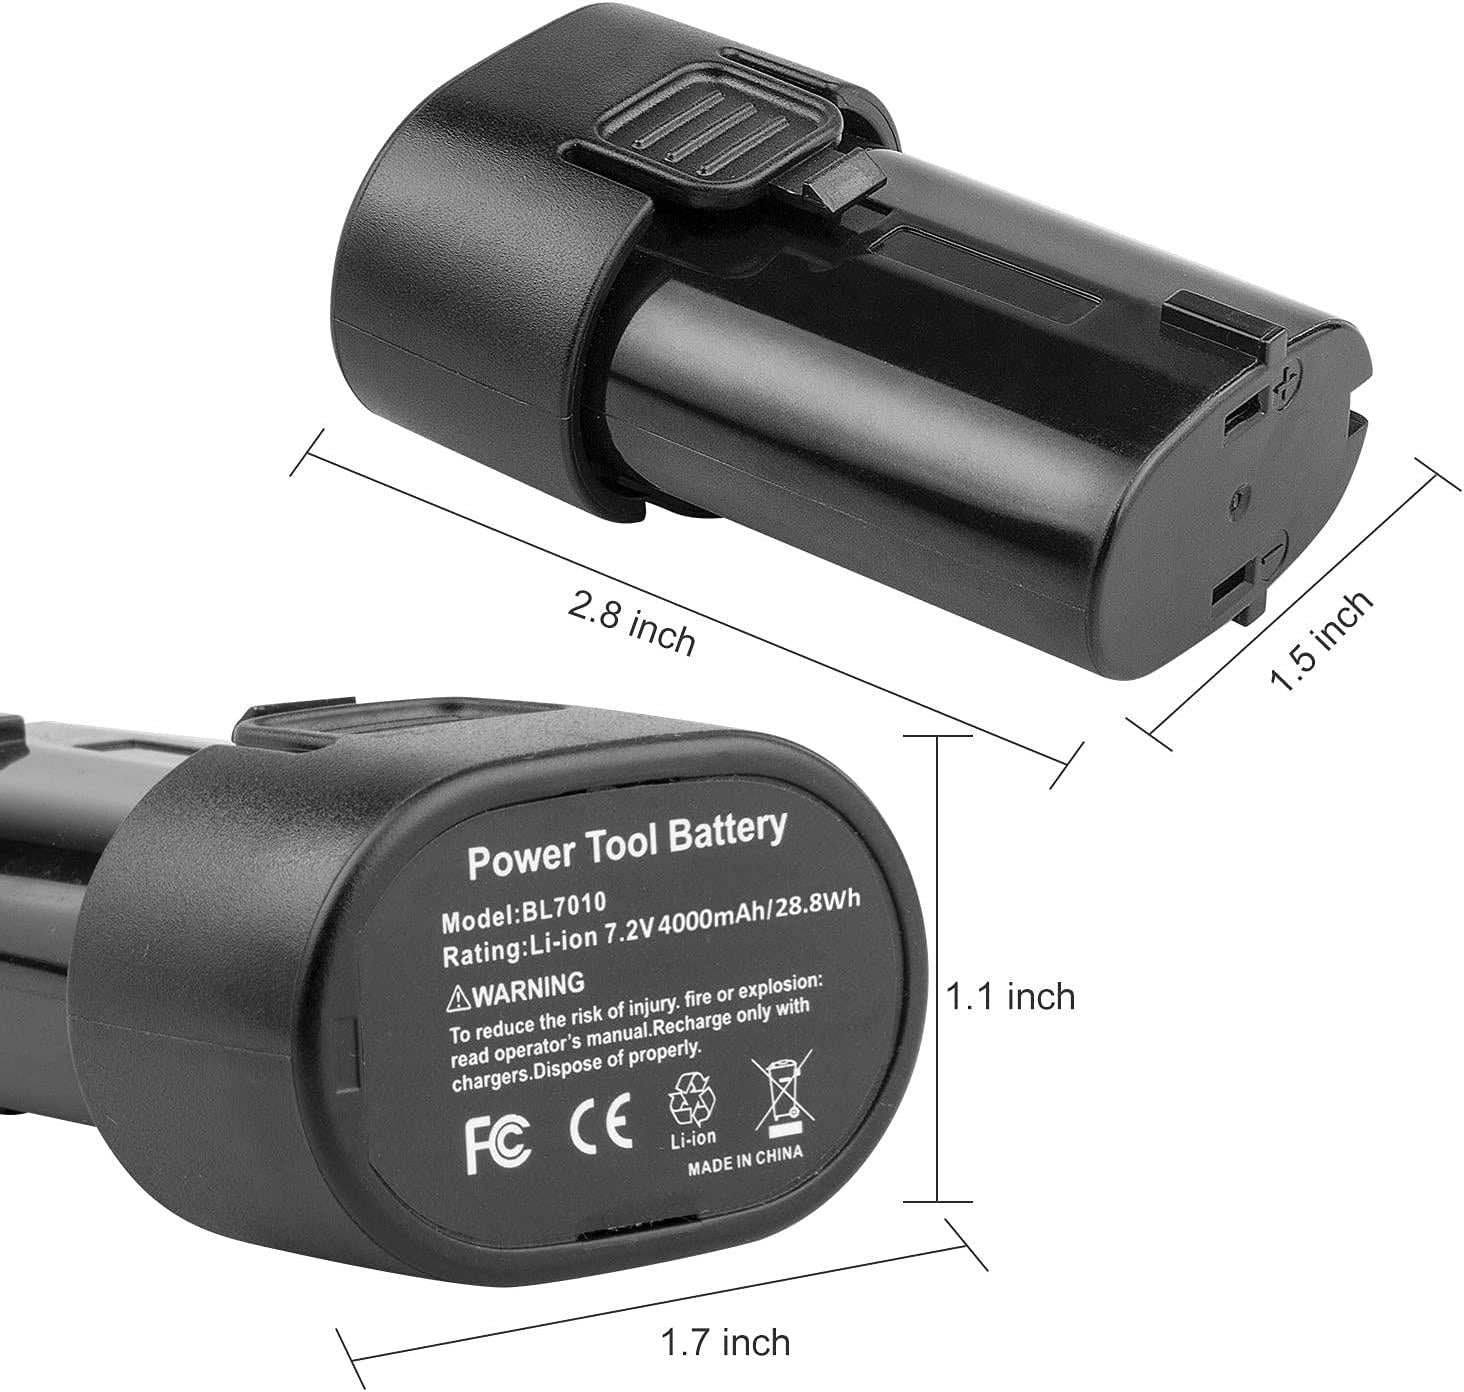 Labtec, LabTEC 2 Packs BL7010 7.2V 4000mAh Lithium Replacement Battery for Makita BL7010 194355-4 194356-2 198000-3 Cordless Power Tool Battery